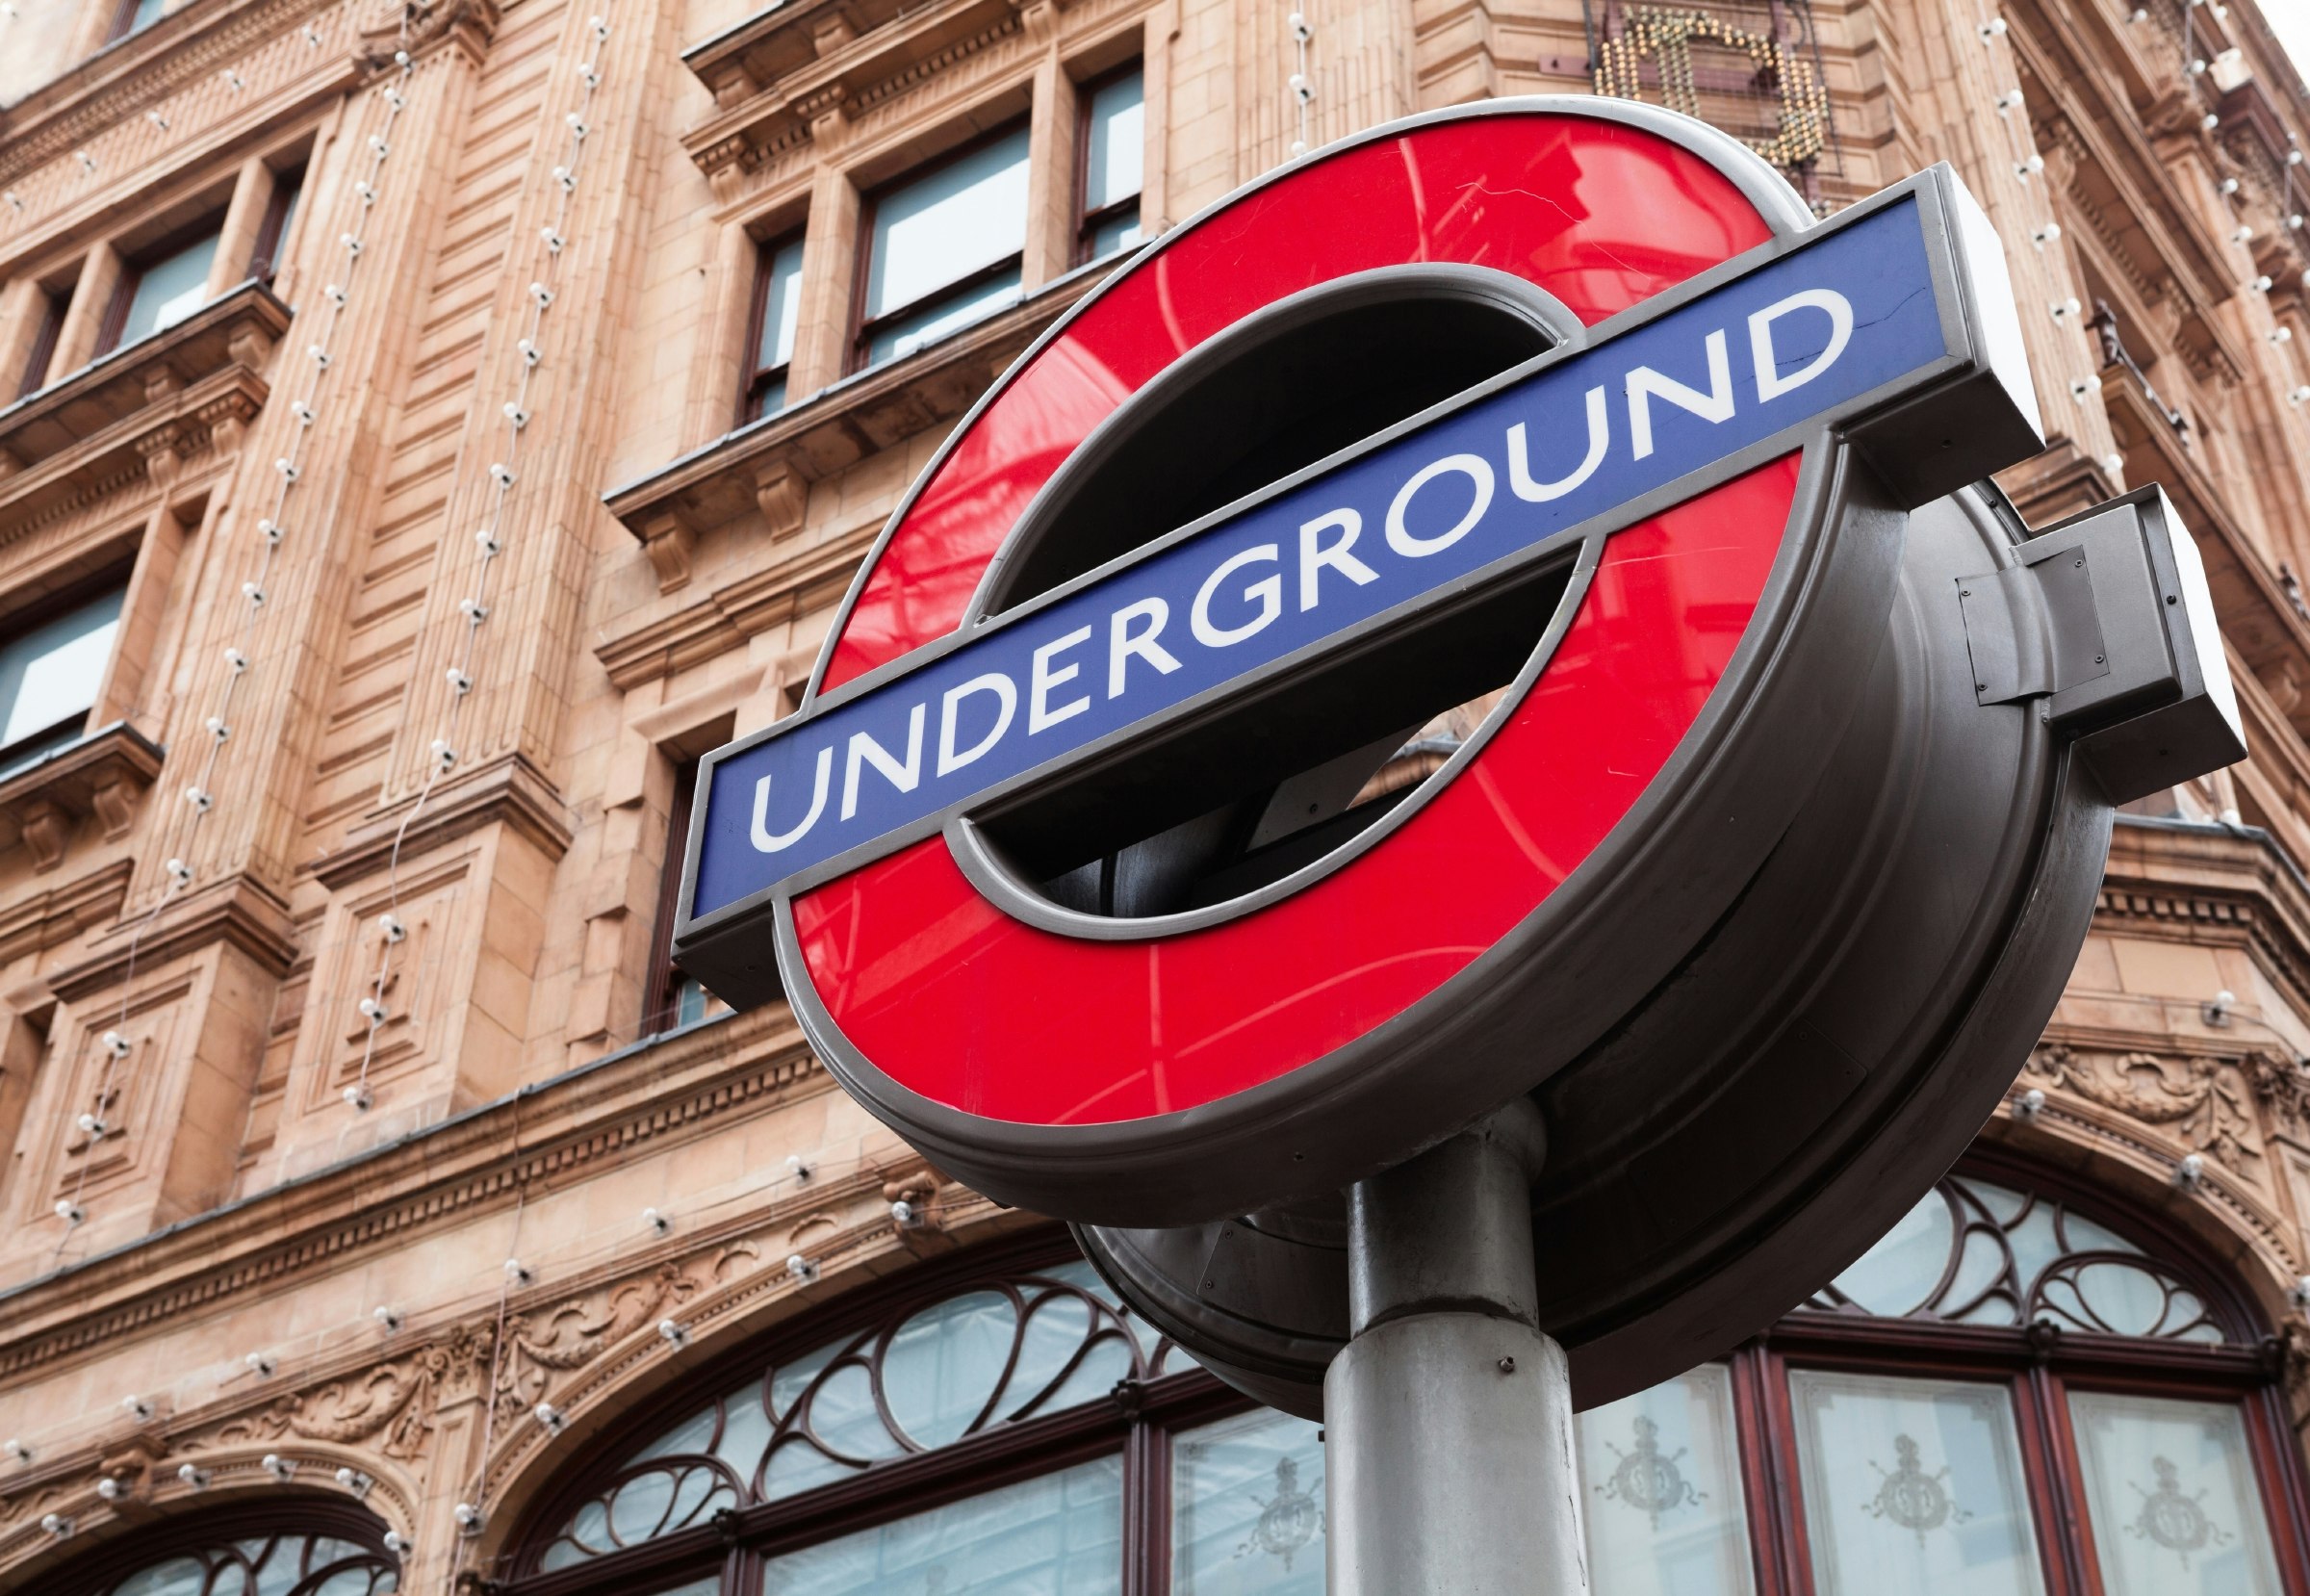 The London Underground roundel outside in front of a building with a stone facade. 